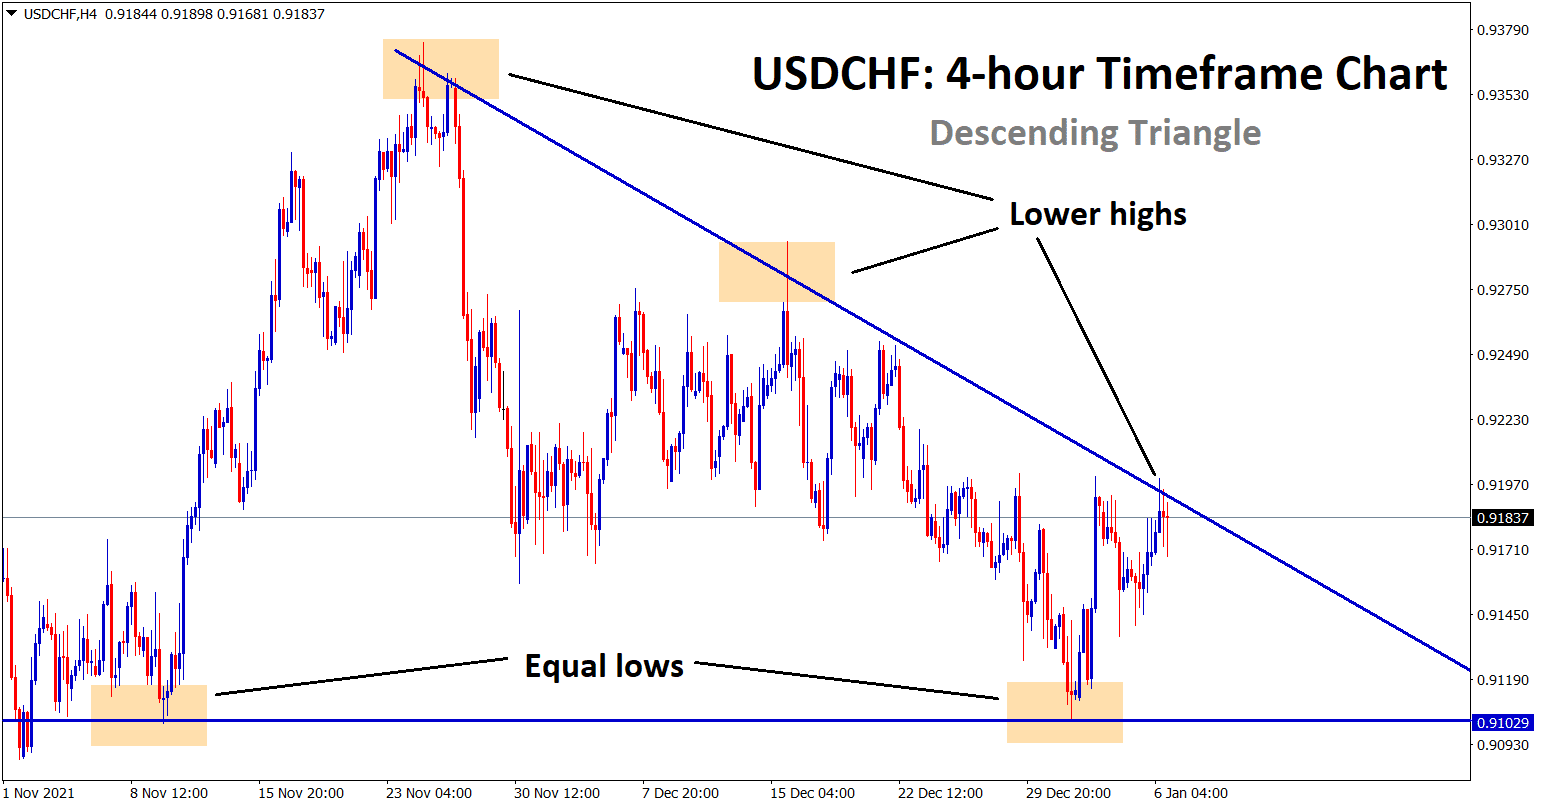 Descending triangle pattern fomed in USDCHF